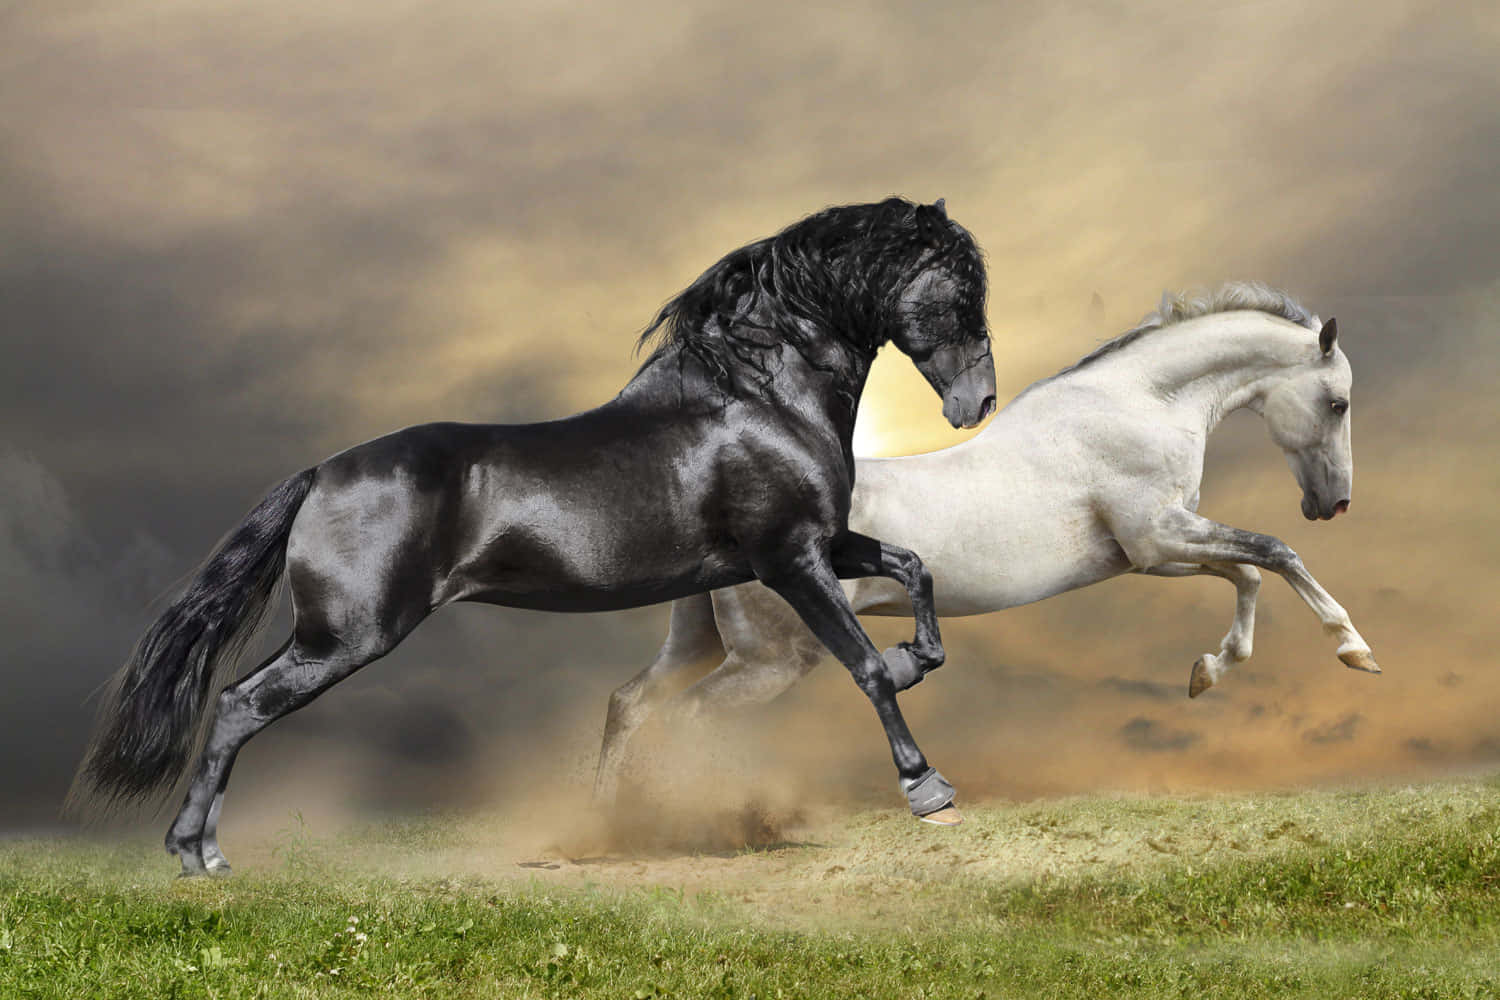 Black And White Horse Galloping Together Picture